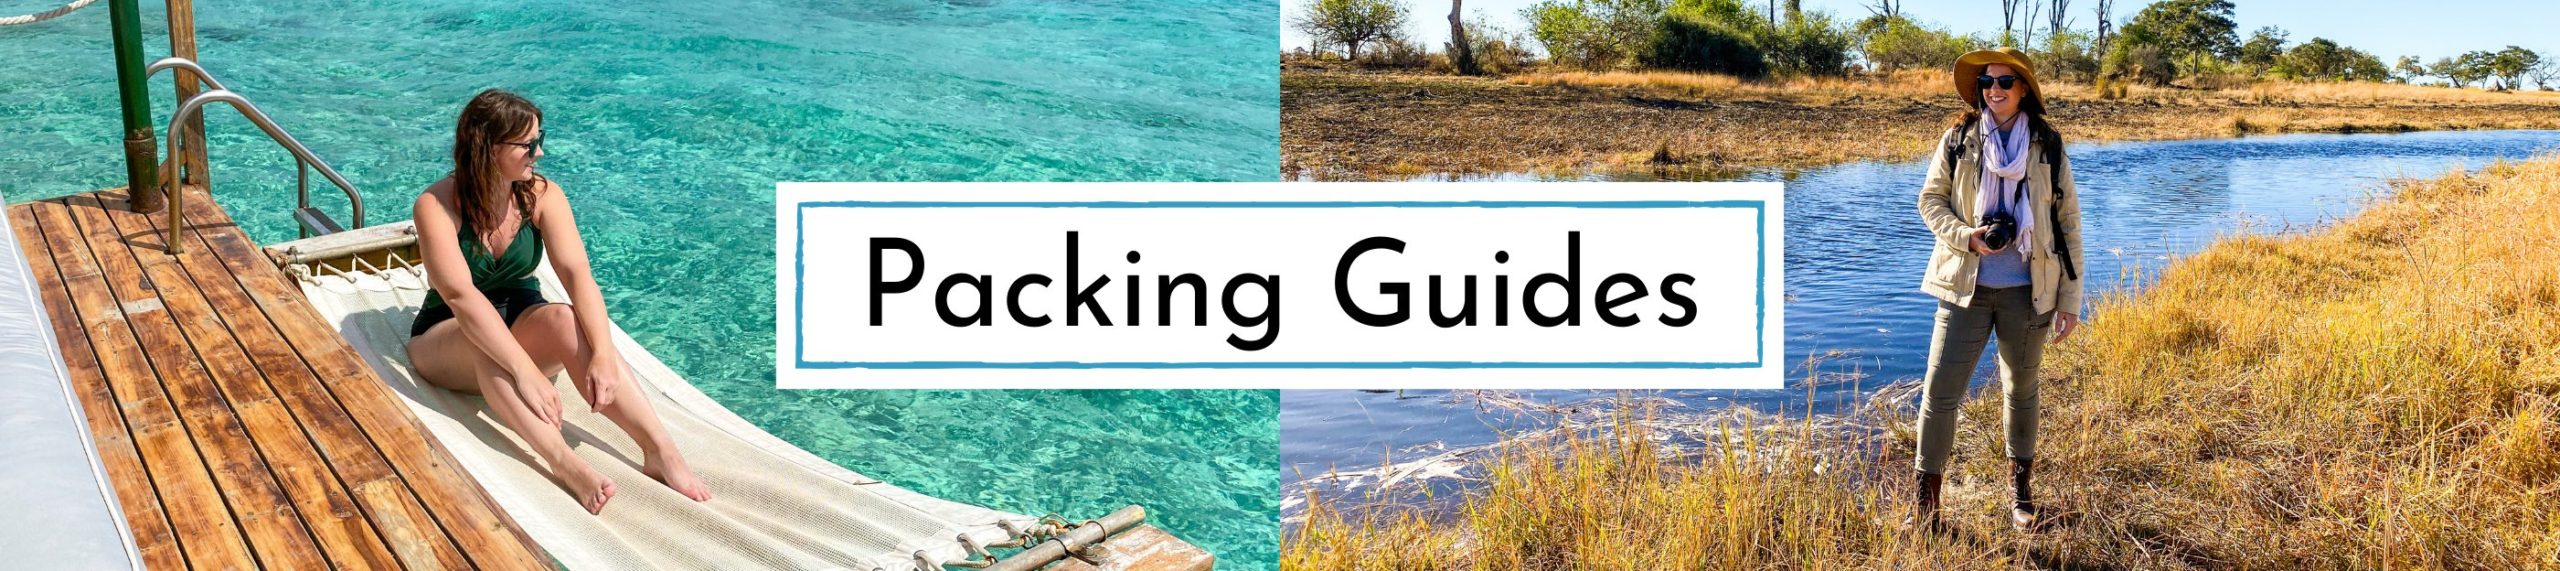 Travel Packing Guides